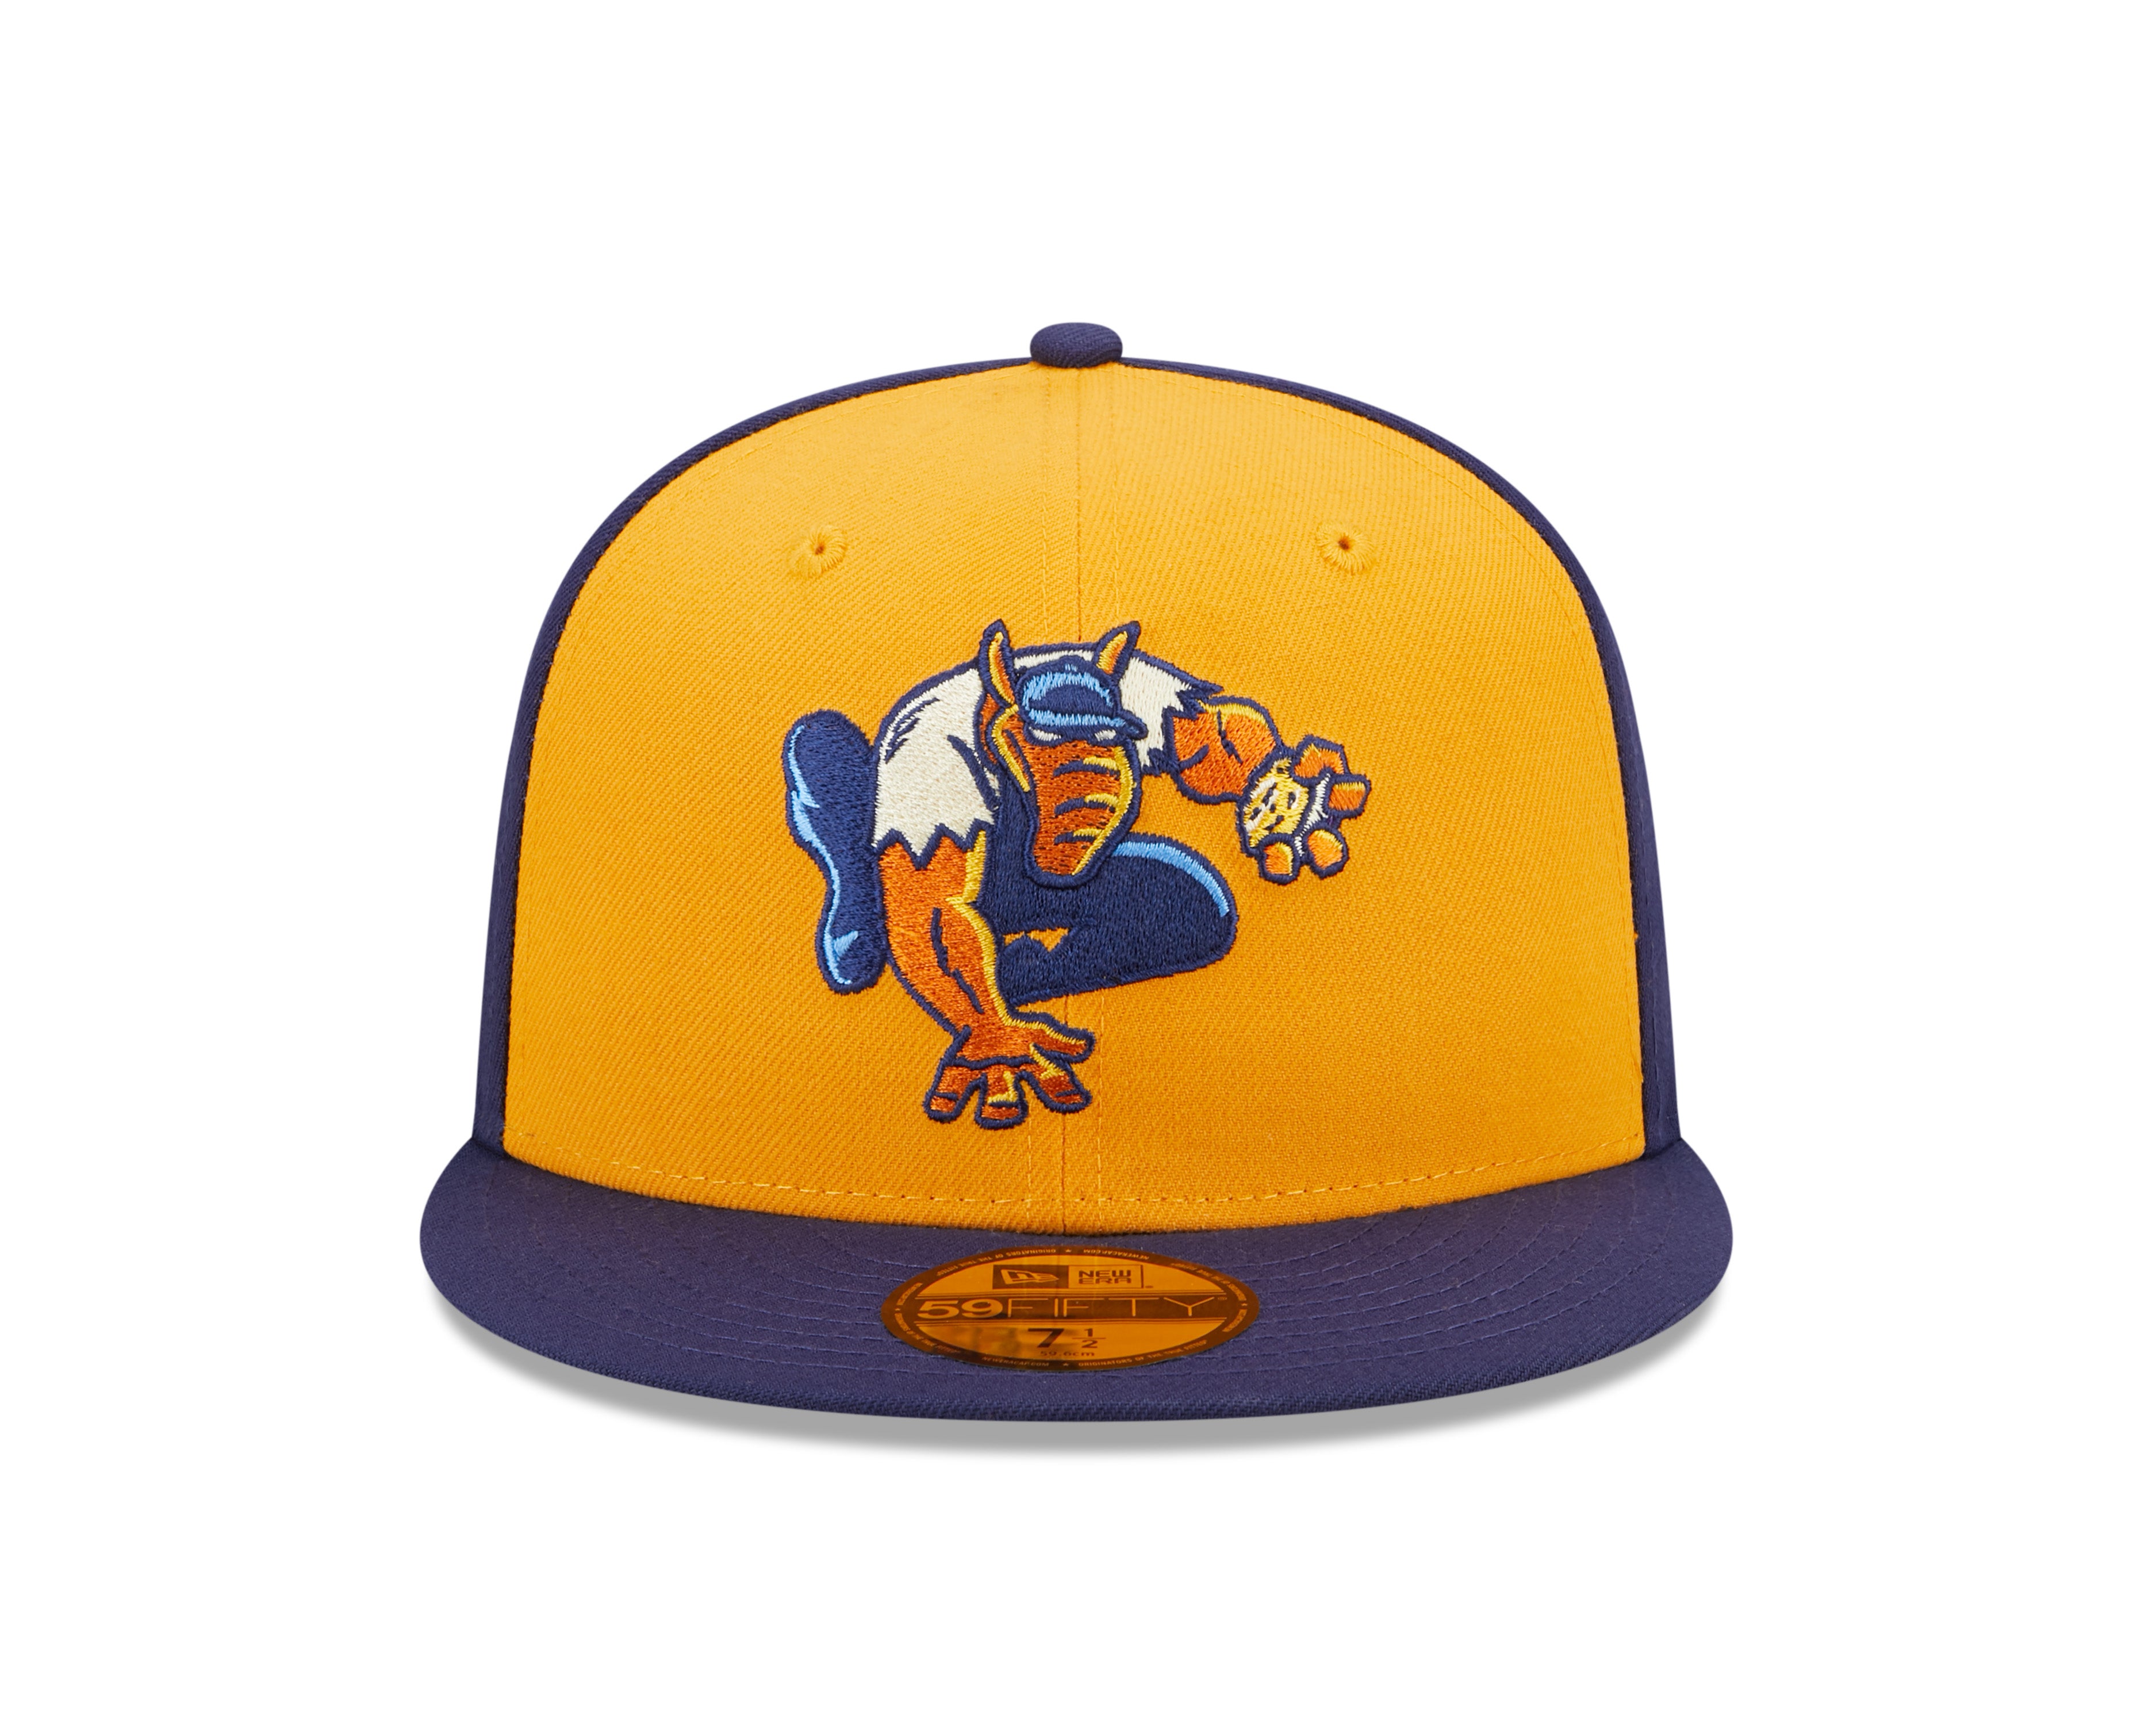 Montgomery Biscuits Marvel's Defenders of The Diamond New Era 59FIFTY Fitted Cap 7 1/8